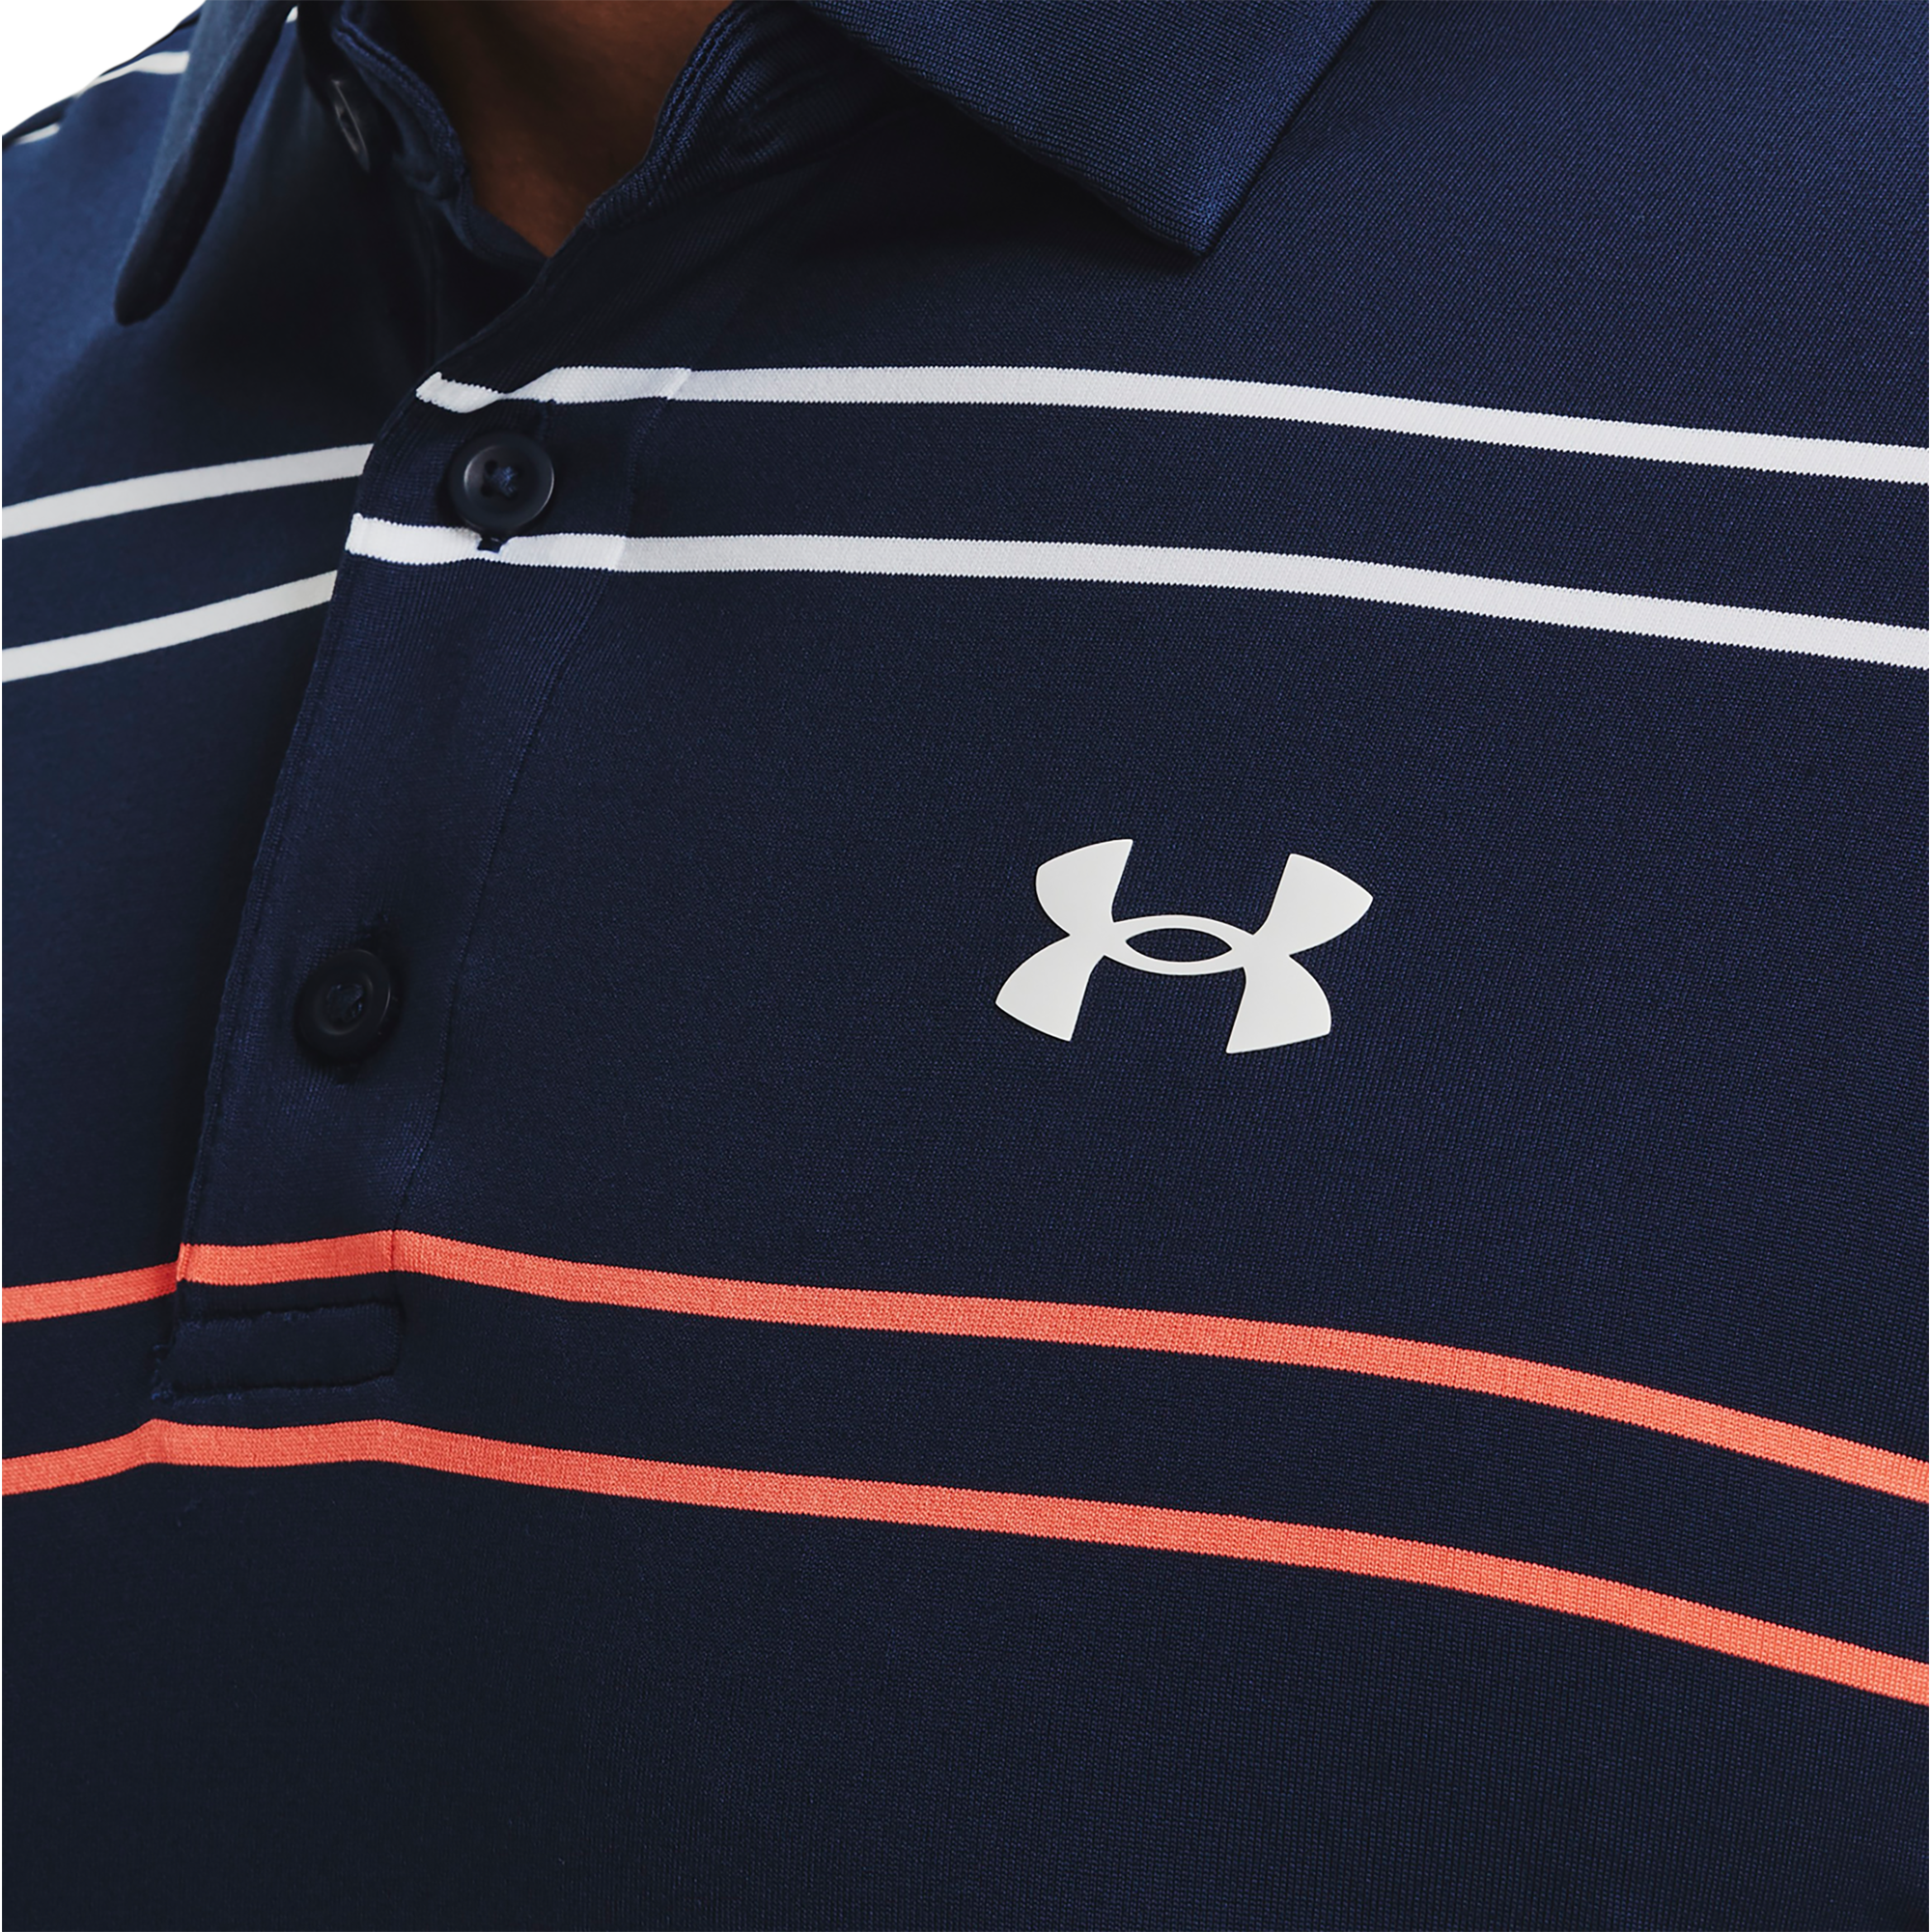 Under Armour Playoff Golf Polo 2.0